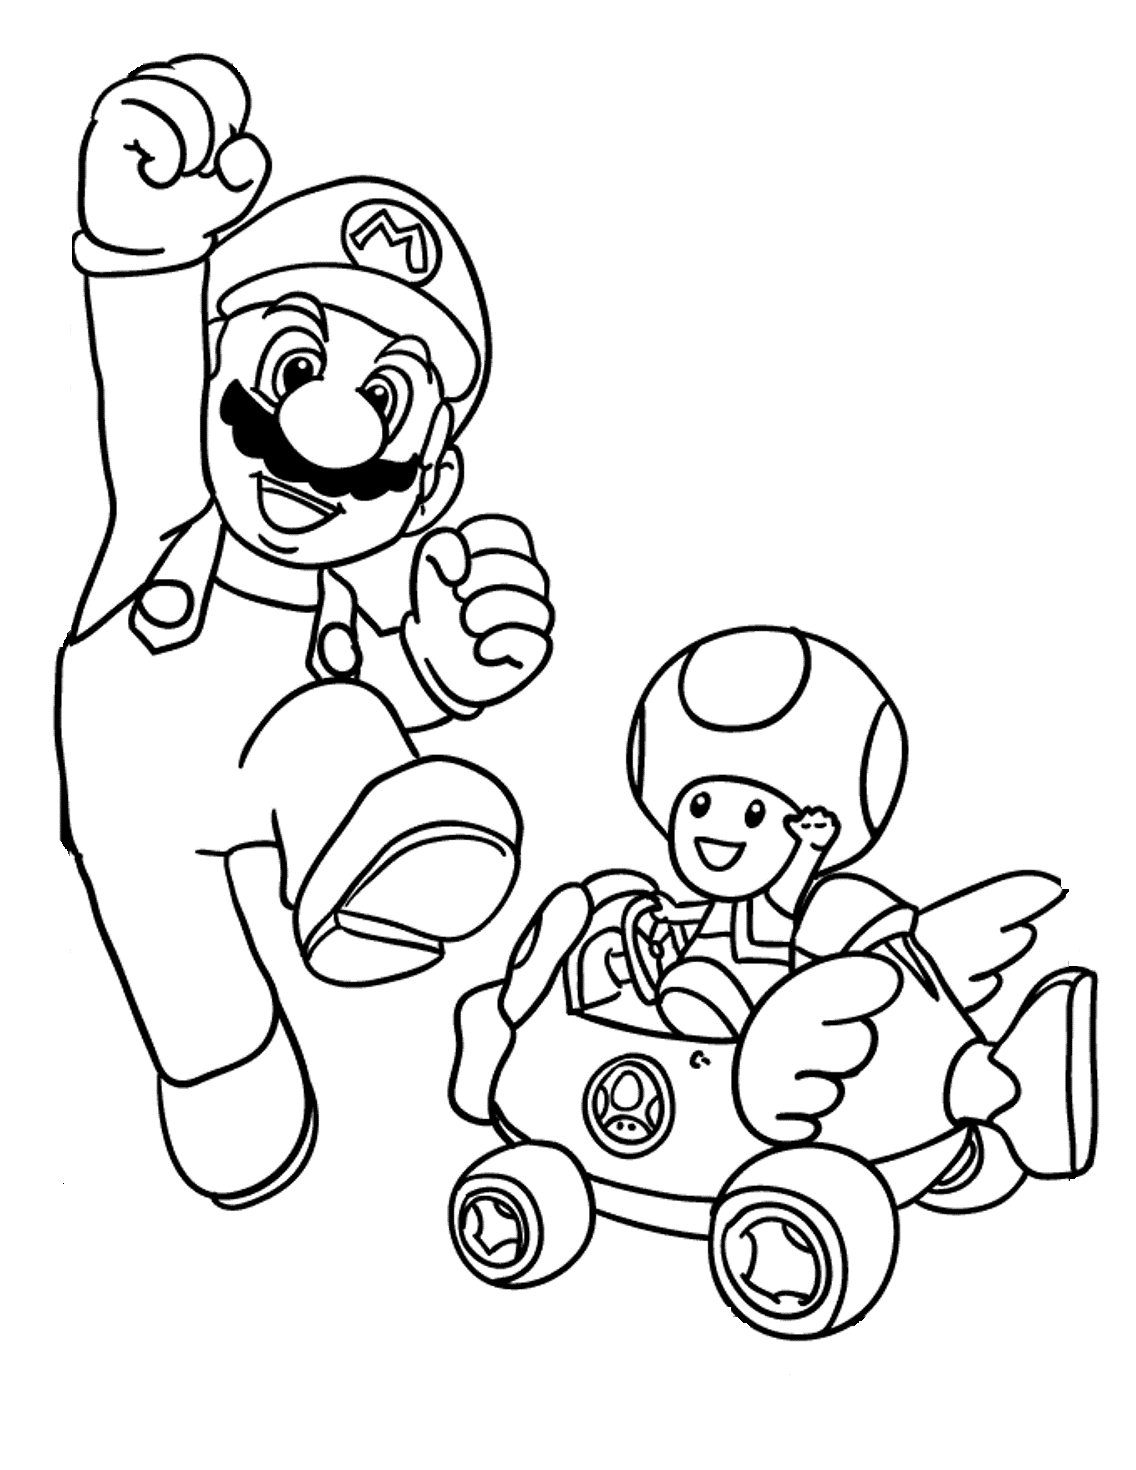 Toad And Toadette Coloring Pages Coloring Design Mario Coloring Pages Kart And Toad Fantastic